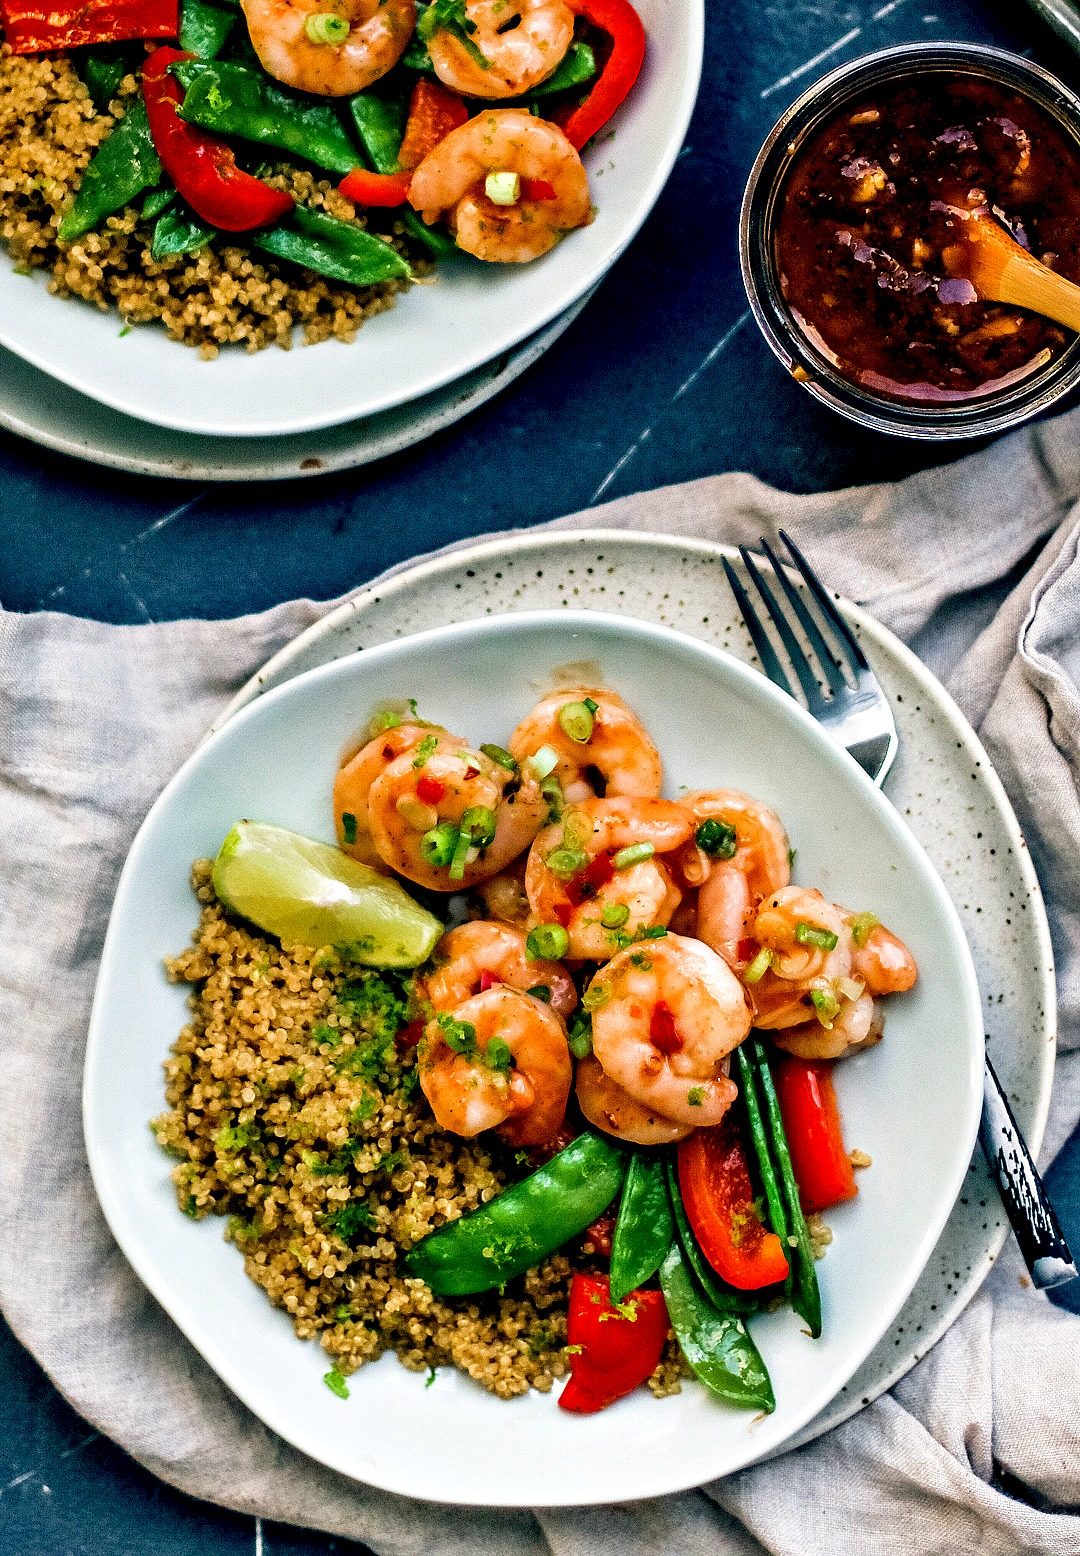 Plate of Spicy Thai Sweet Chili Shrimp with vegetables and quinoa.